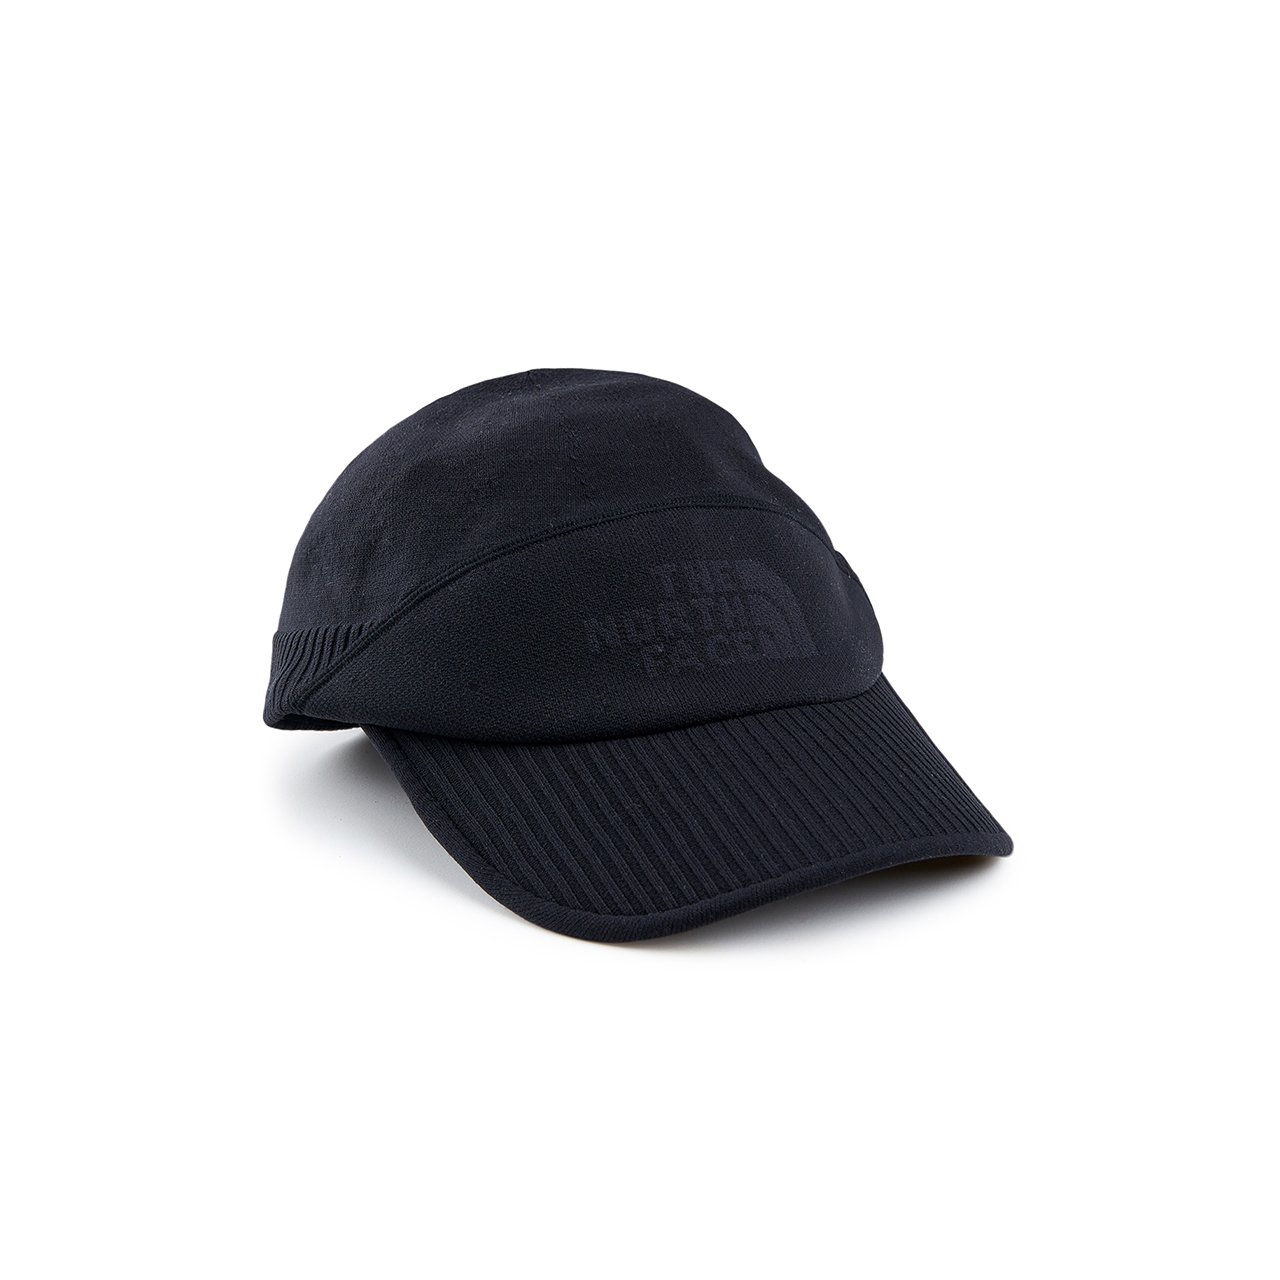 the north face black series knit cap (black) - nf0a3shijk3 - a.plus - Image - 3